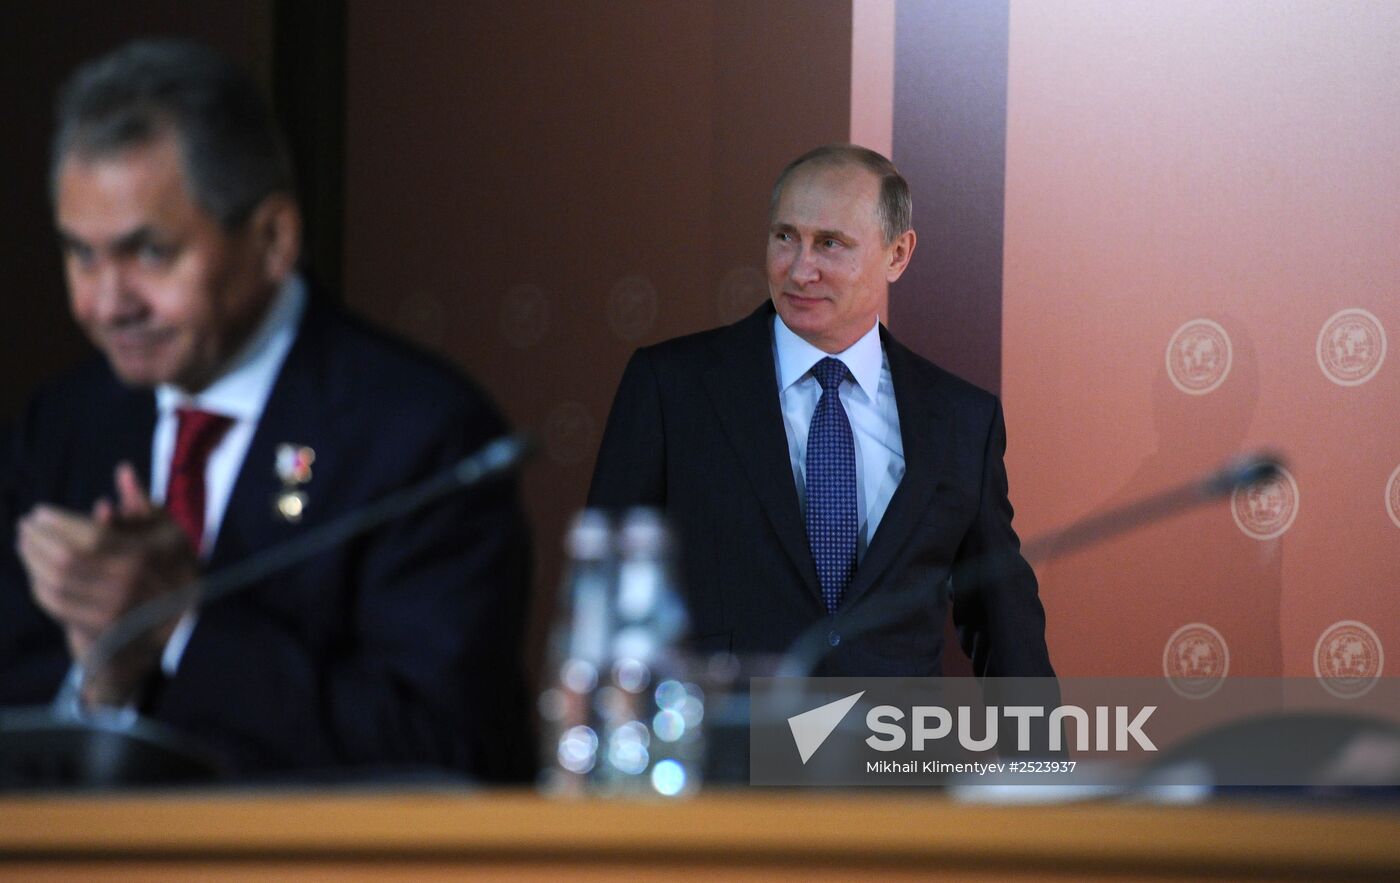 Putin attends 15th Congress of the Russian Geographical Society